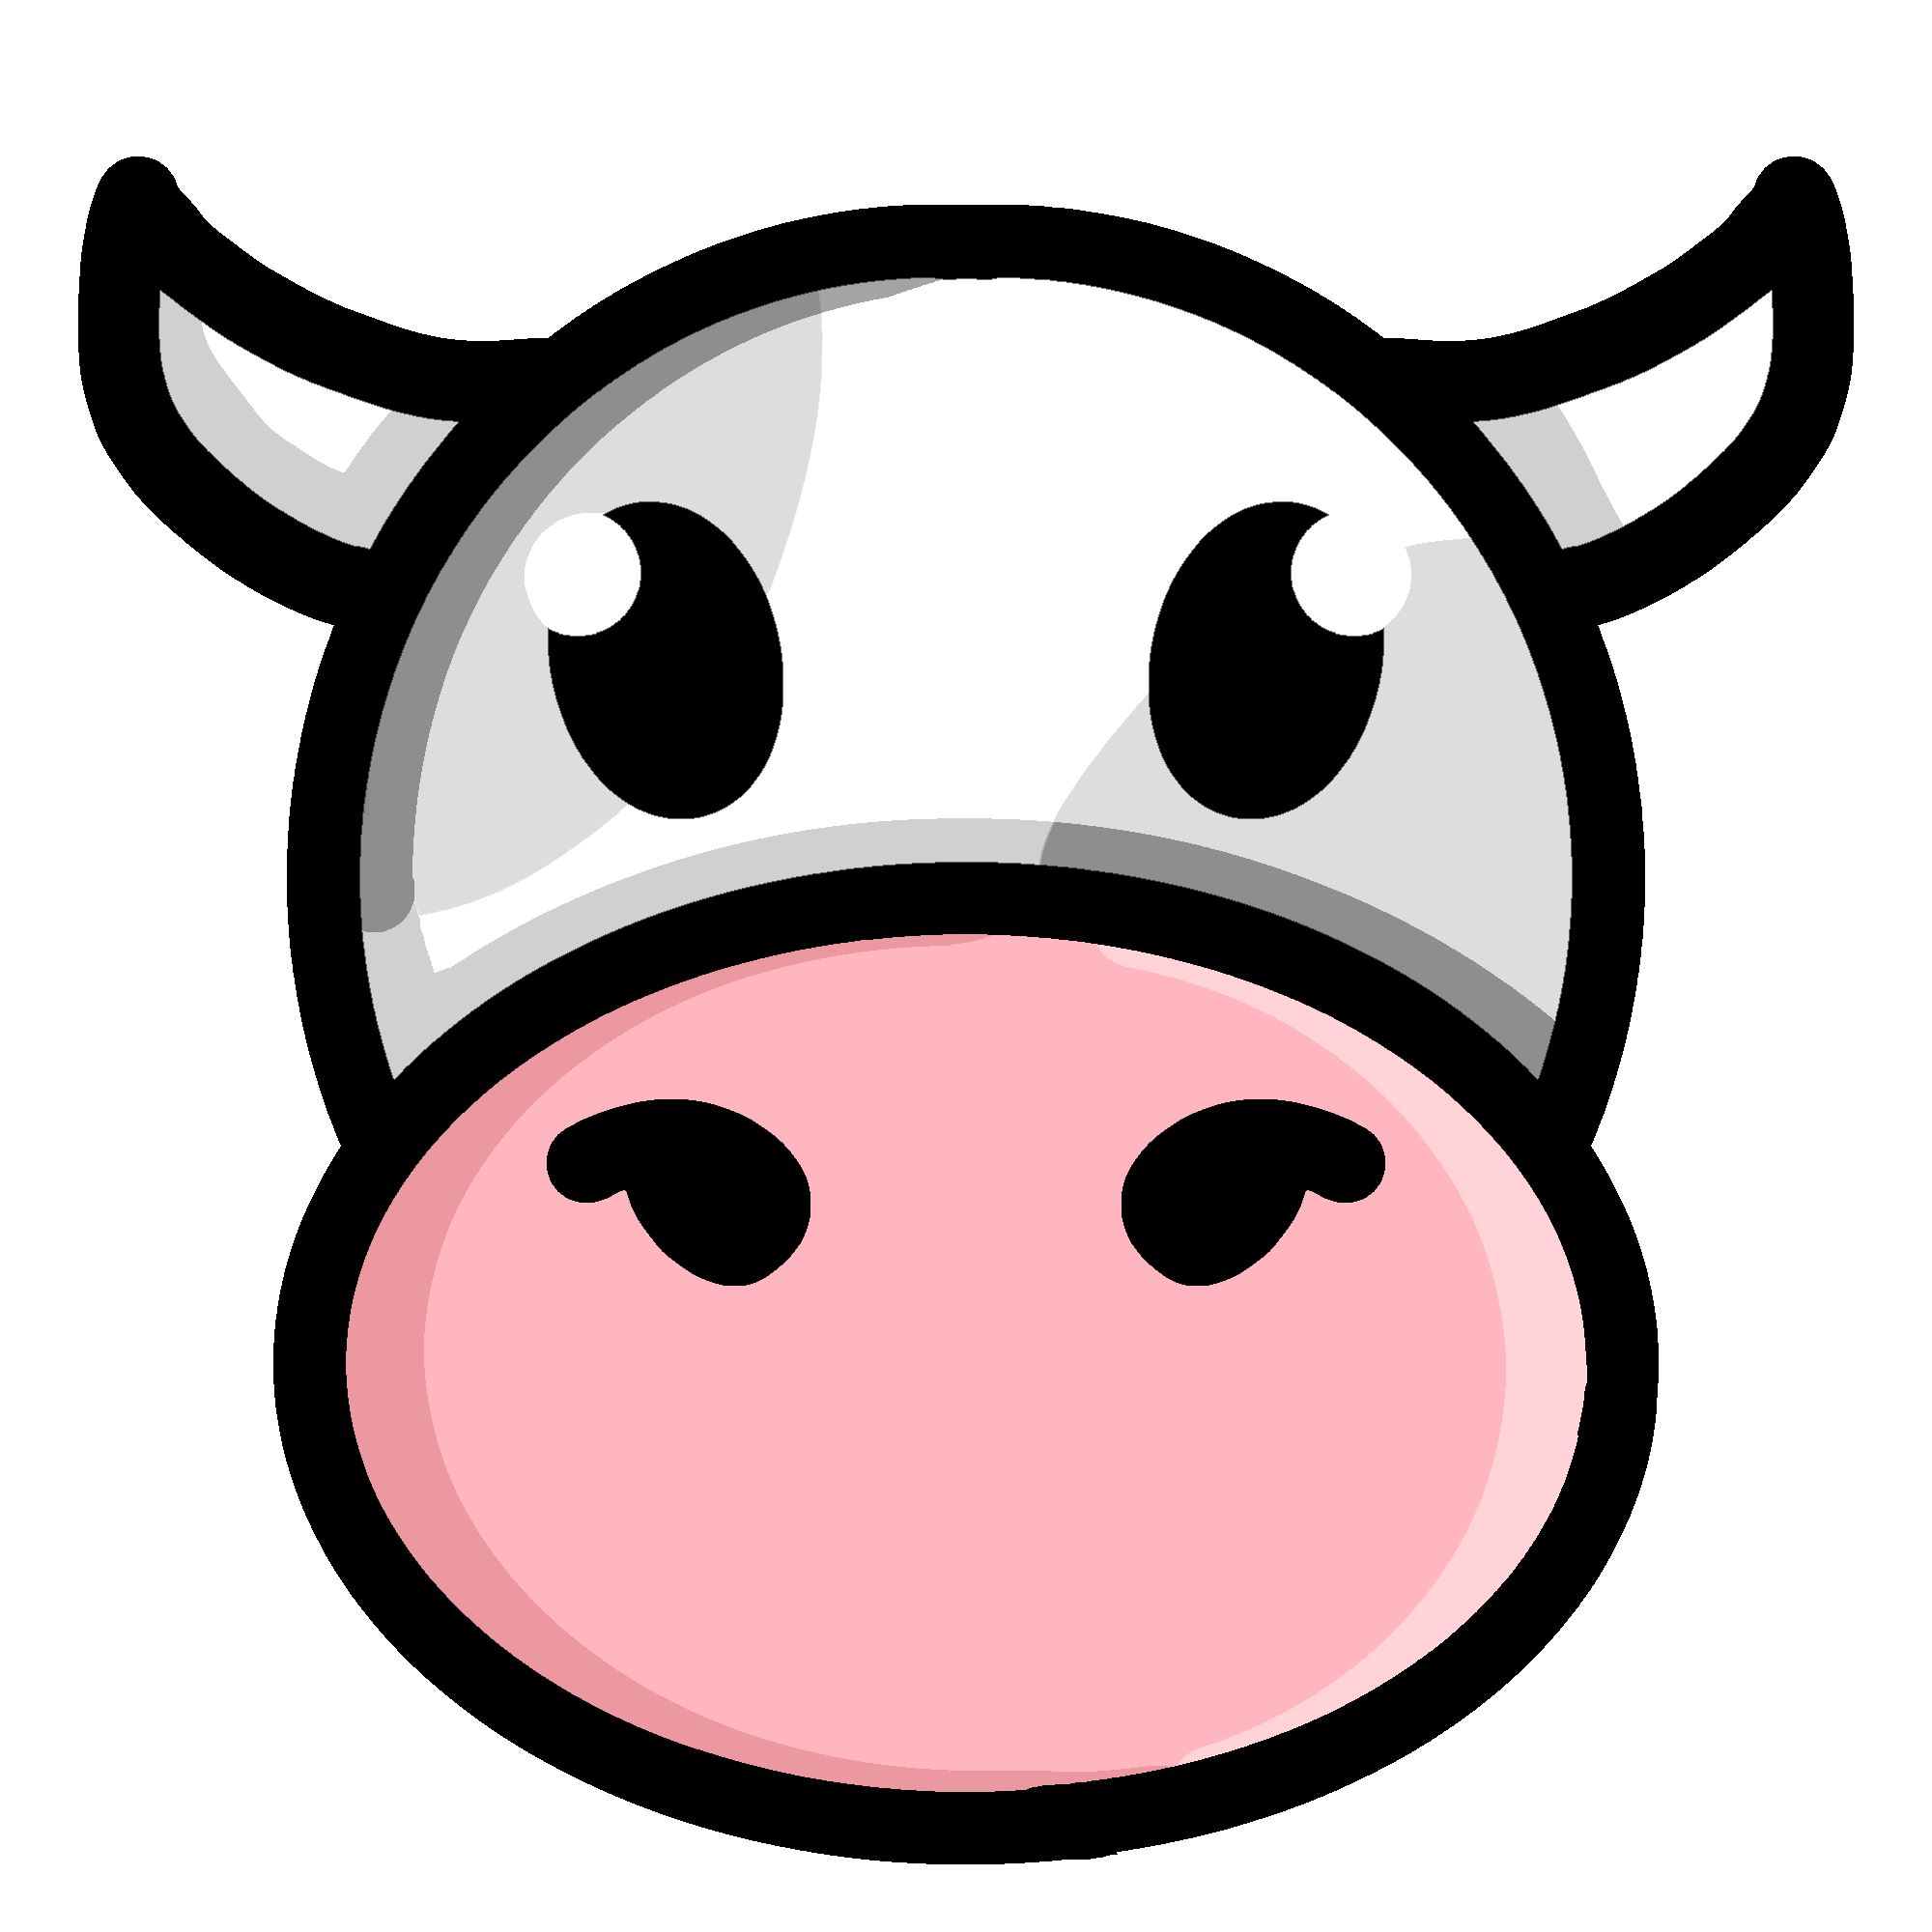 OpenMoo logo: the head of a cow